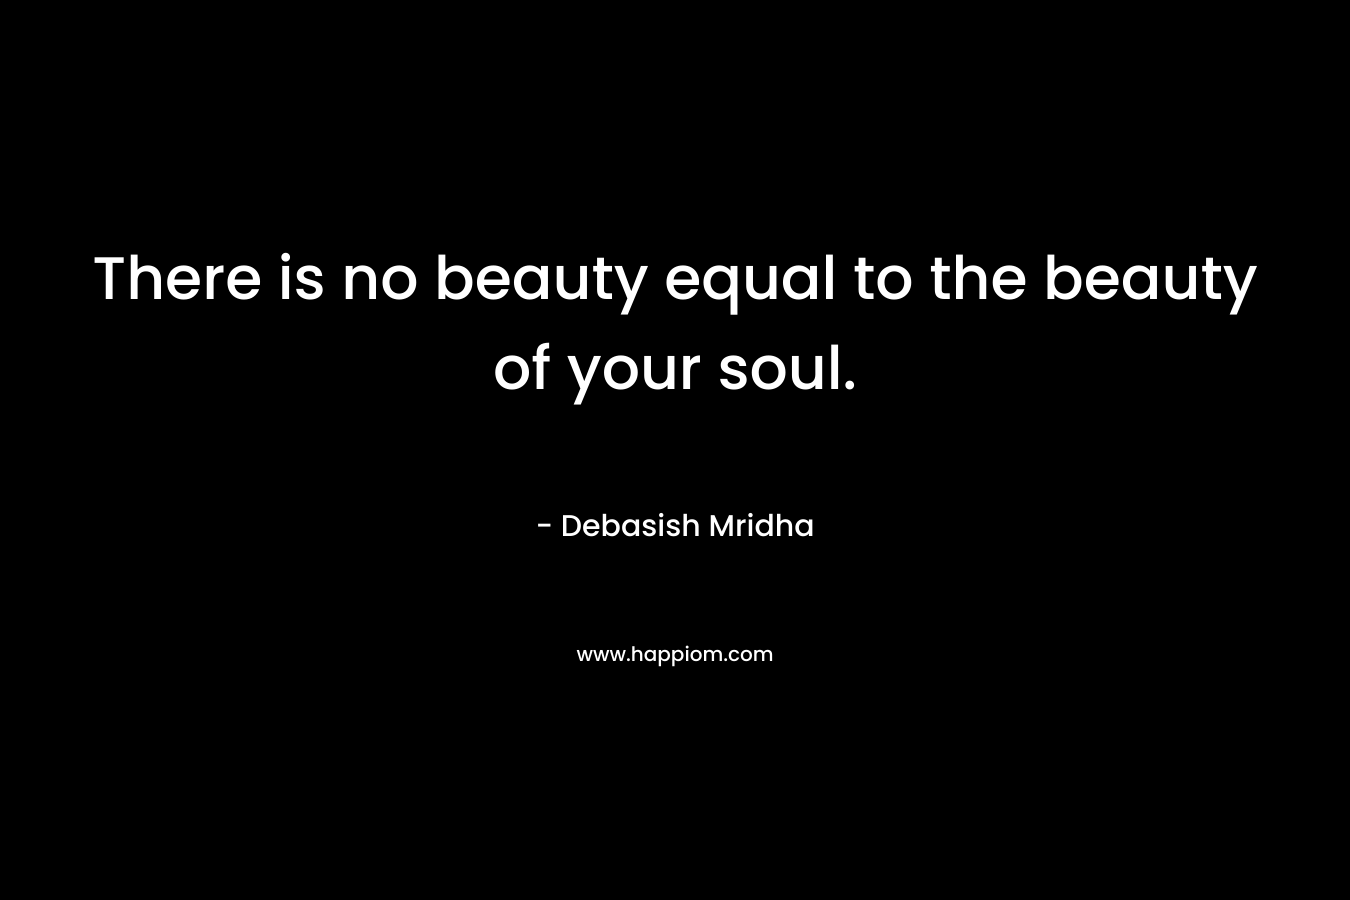 There is no beauty equal to the beauty of your soul.